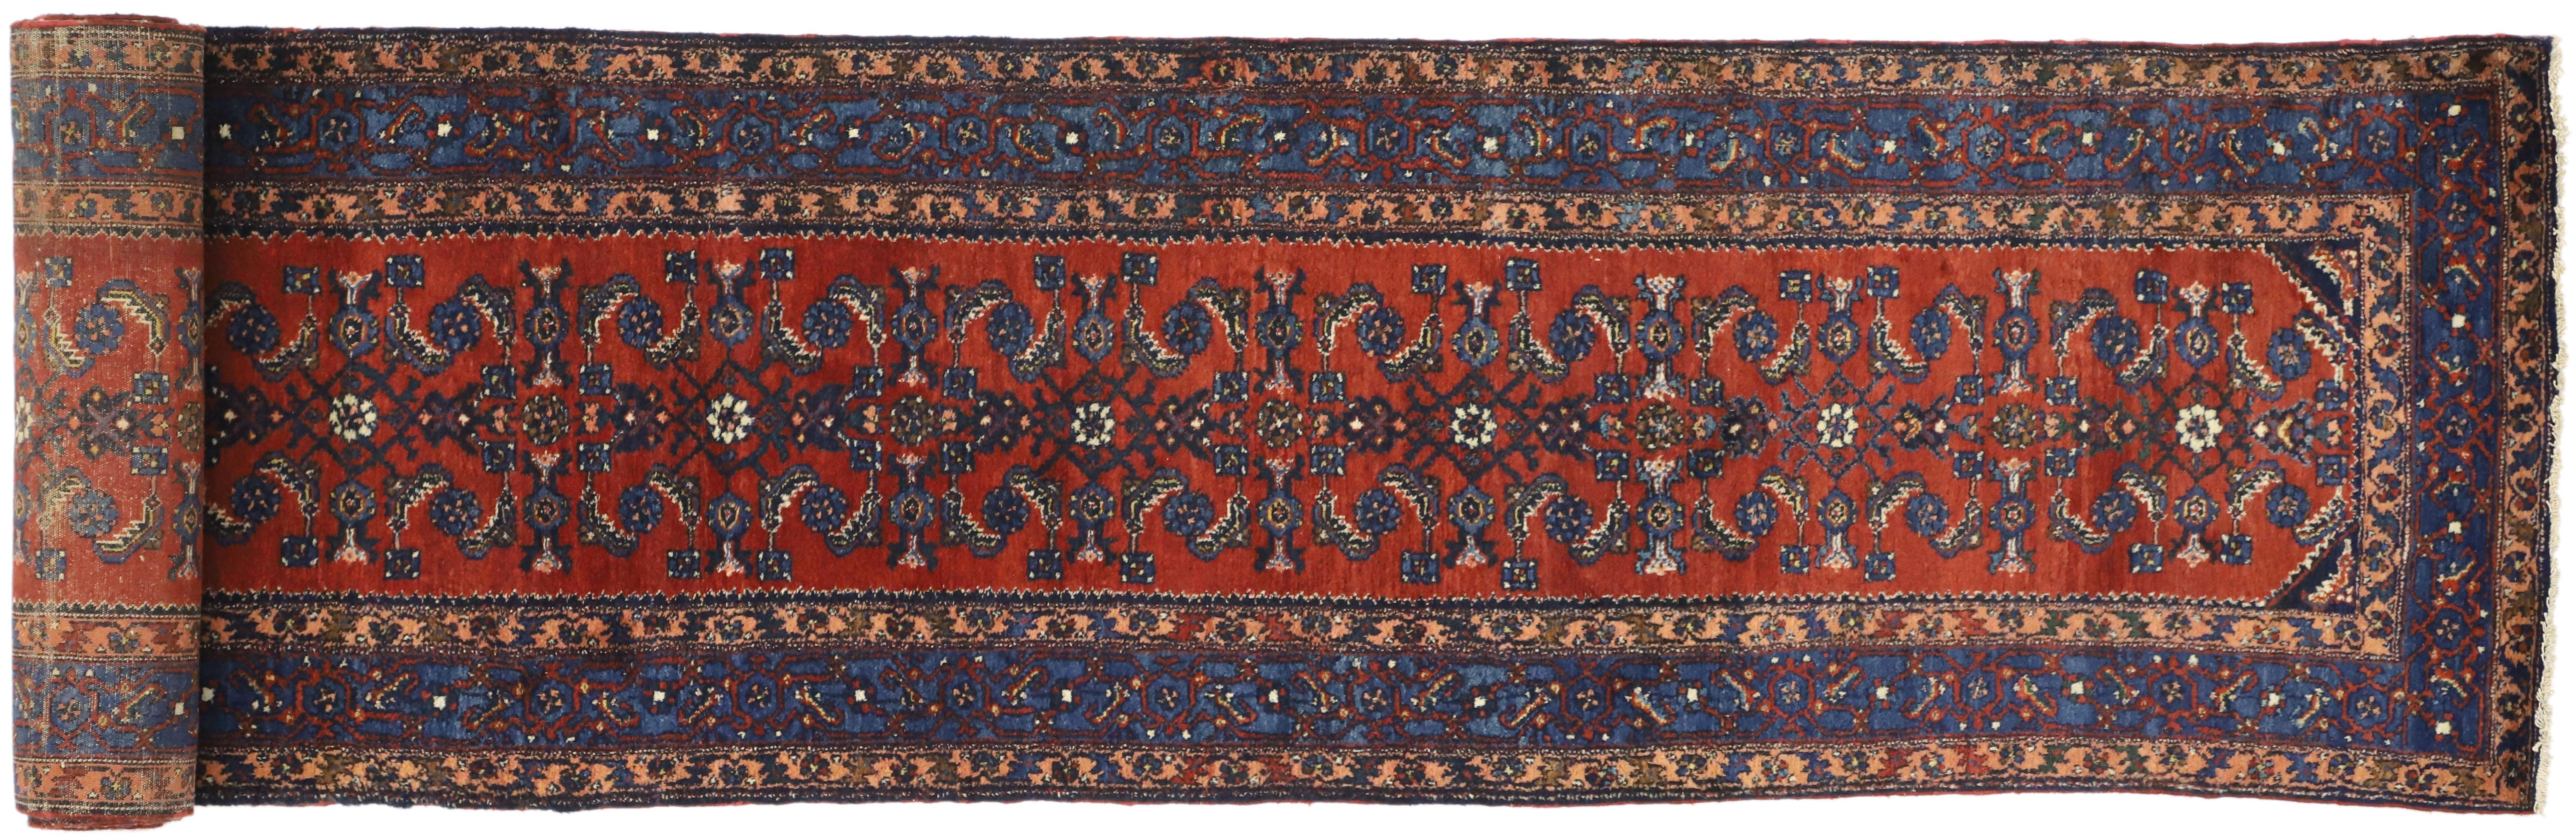 Antique Persian Malayer Long Runner with Elizabeth Tudor Style For Sale 4